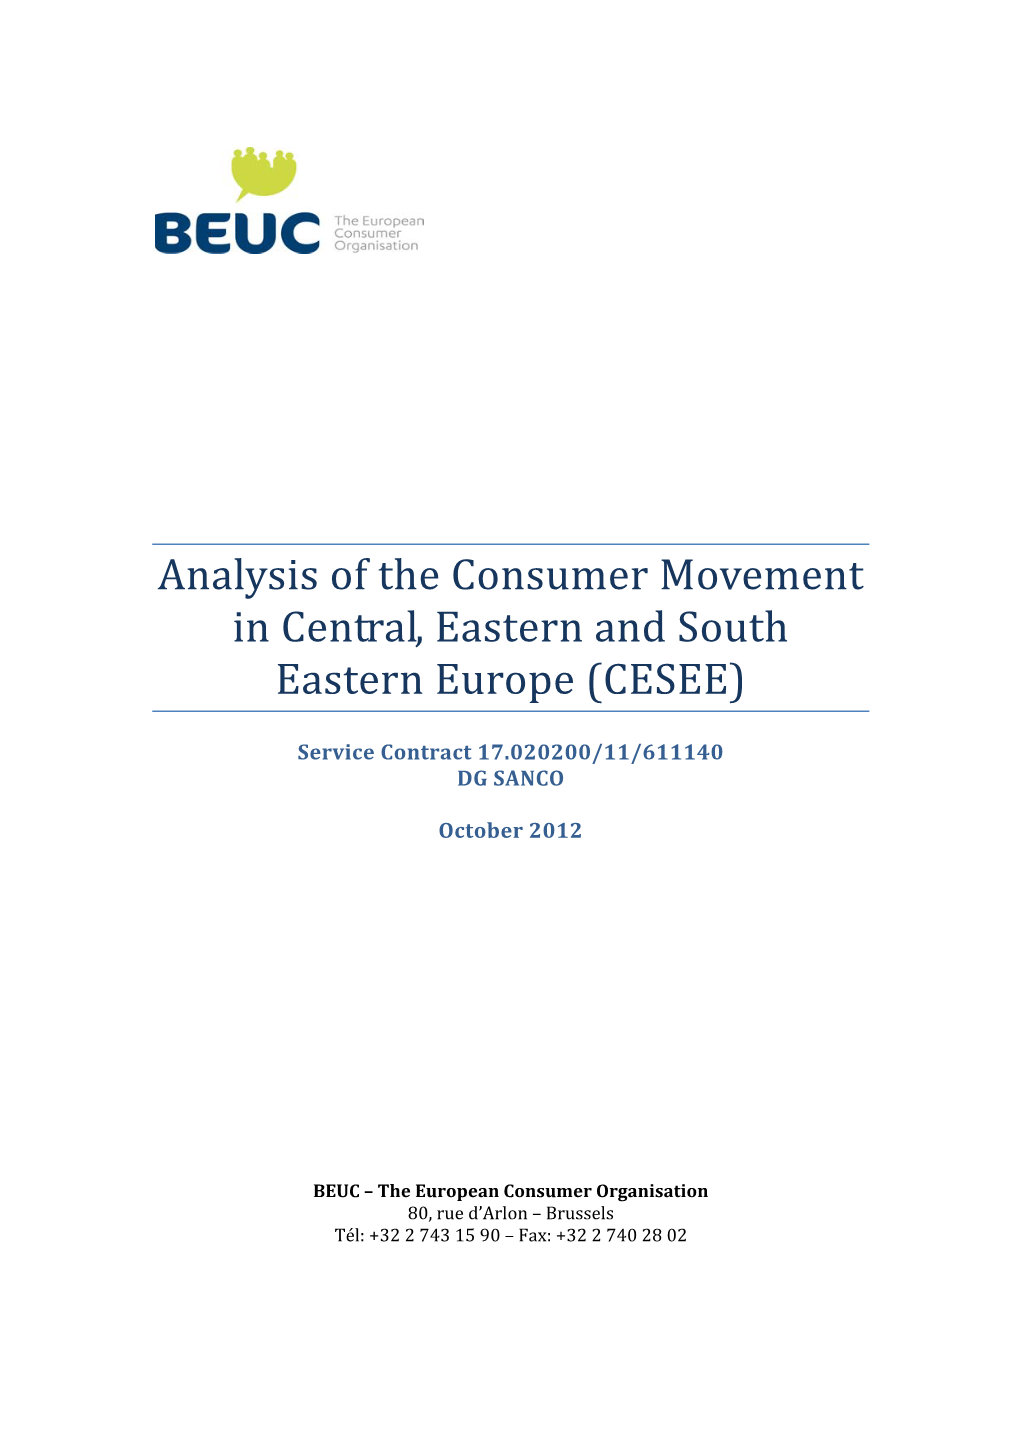 Analysis of the Consumer Movement in Central, Eastern and South Eastern Europe (CESEE)